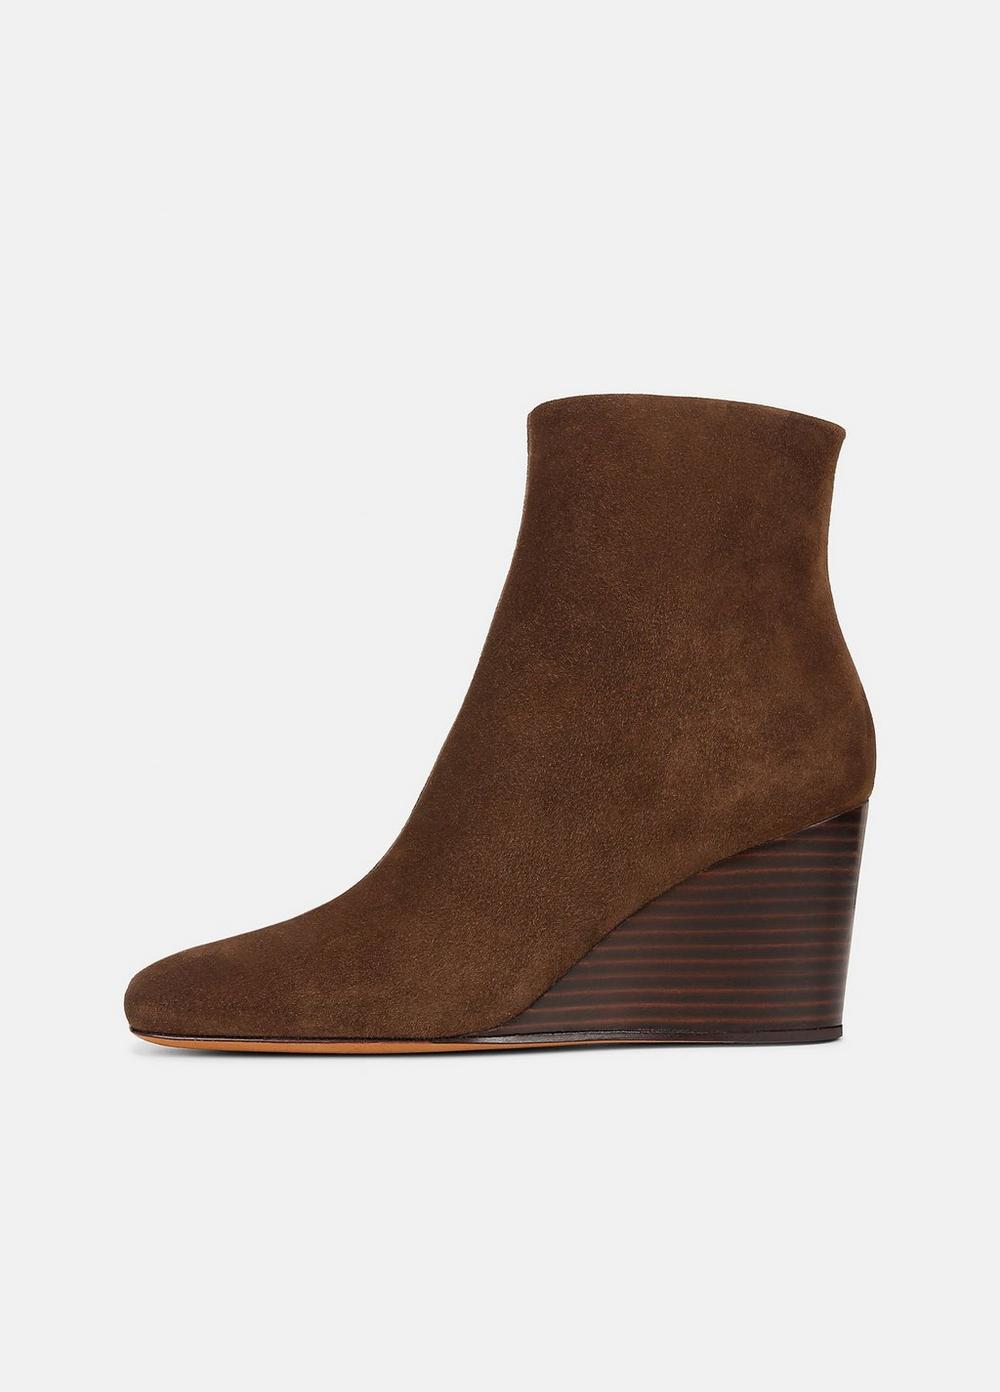 Andy Suede Ankle Boot in Boots | Vince